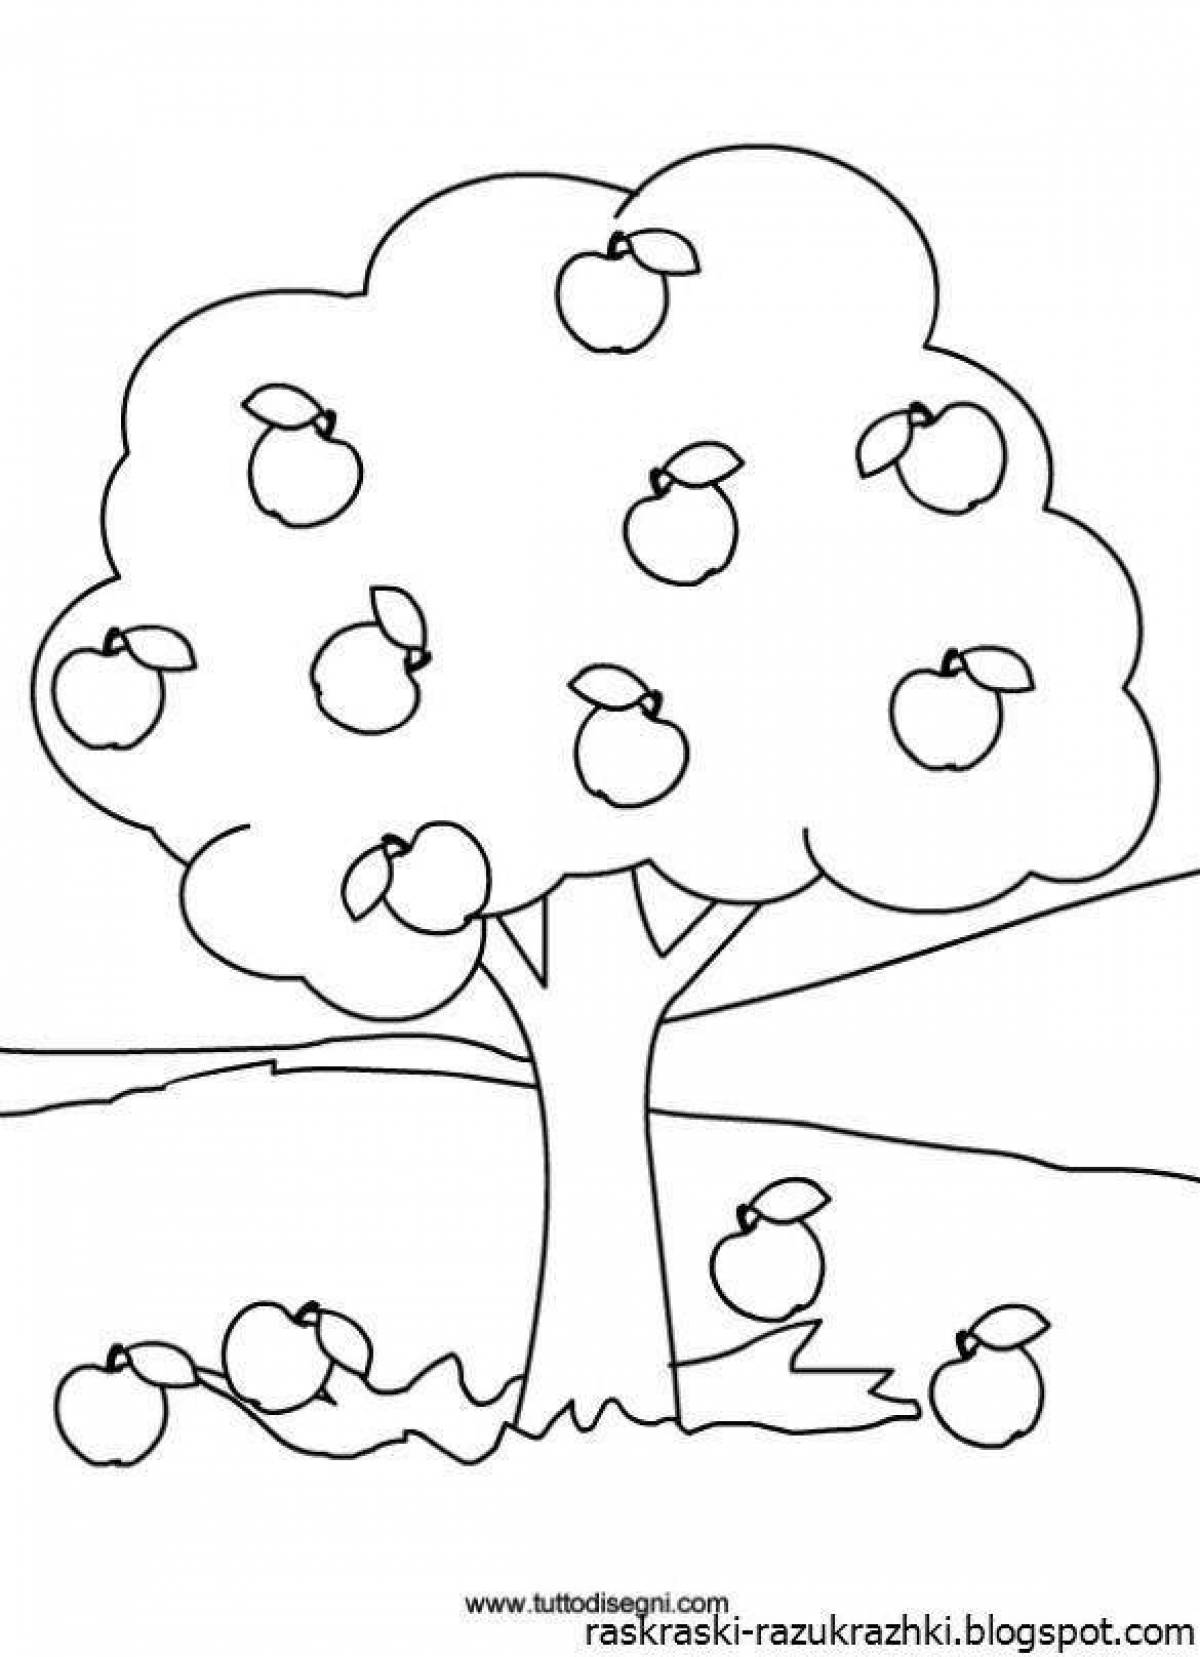 Coloring blossom tree with apples